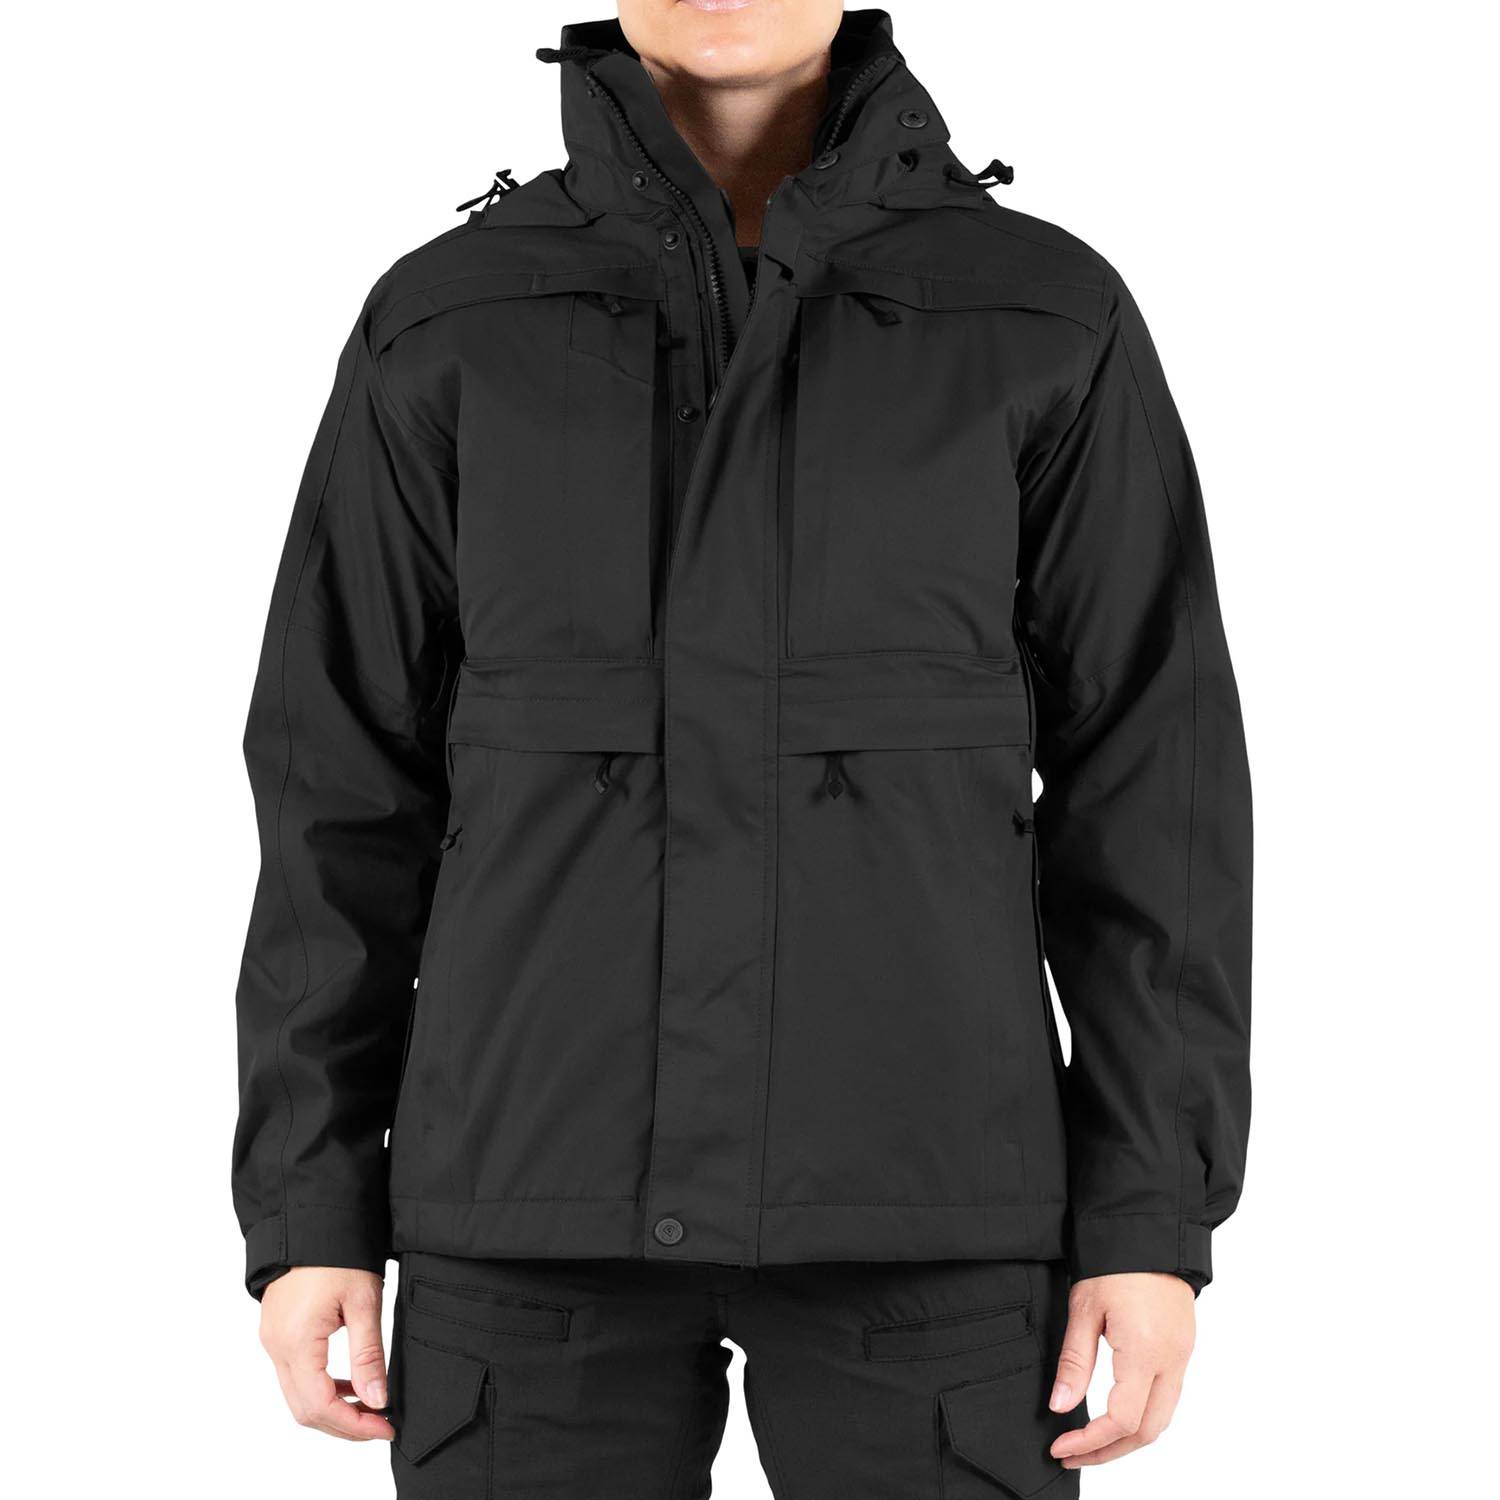 FIRST TACTICAL WOMEN'S TACTIX 3-IN-1 SYSTEM PARKA